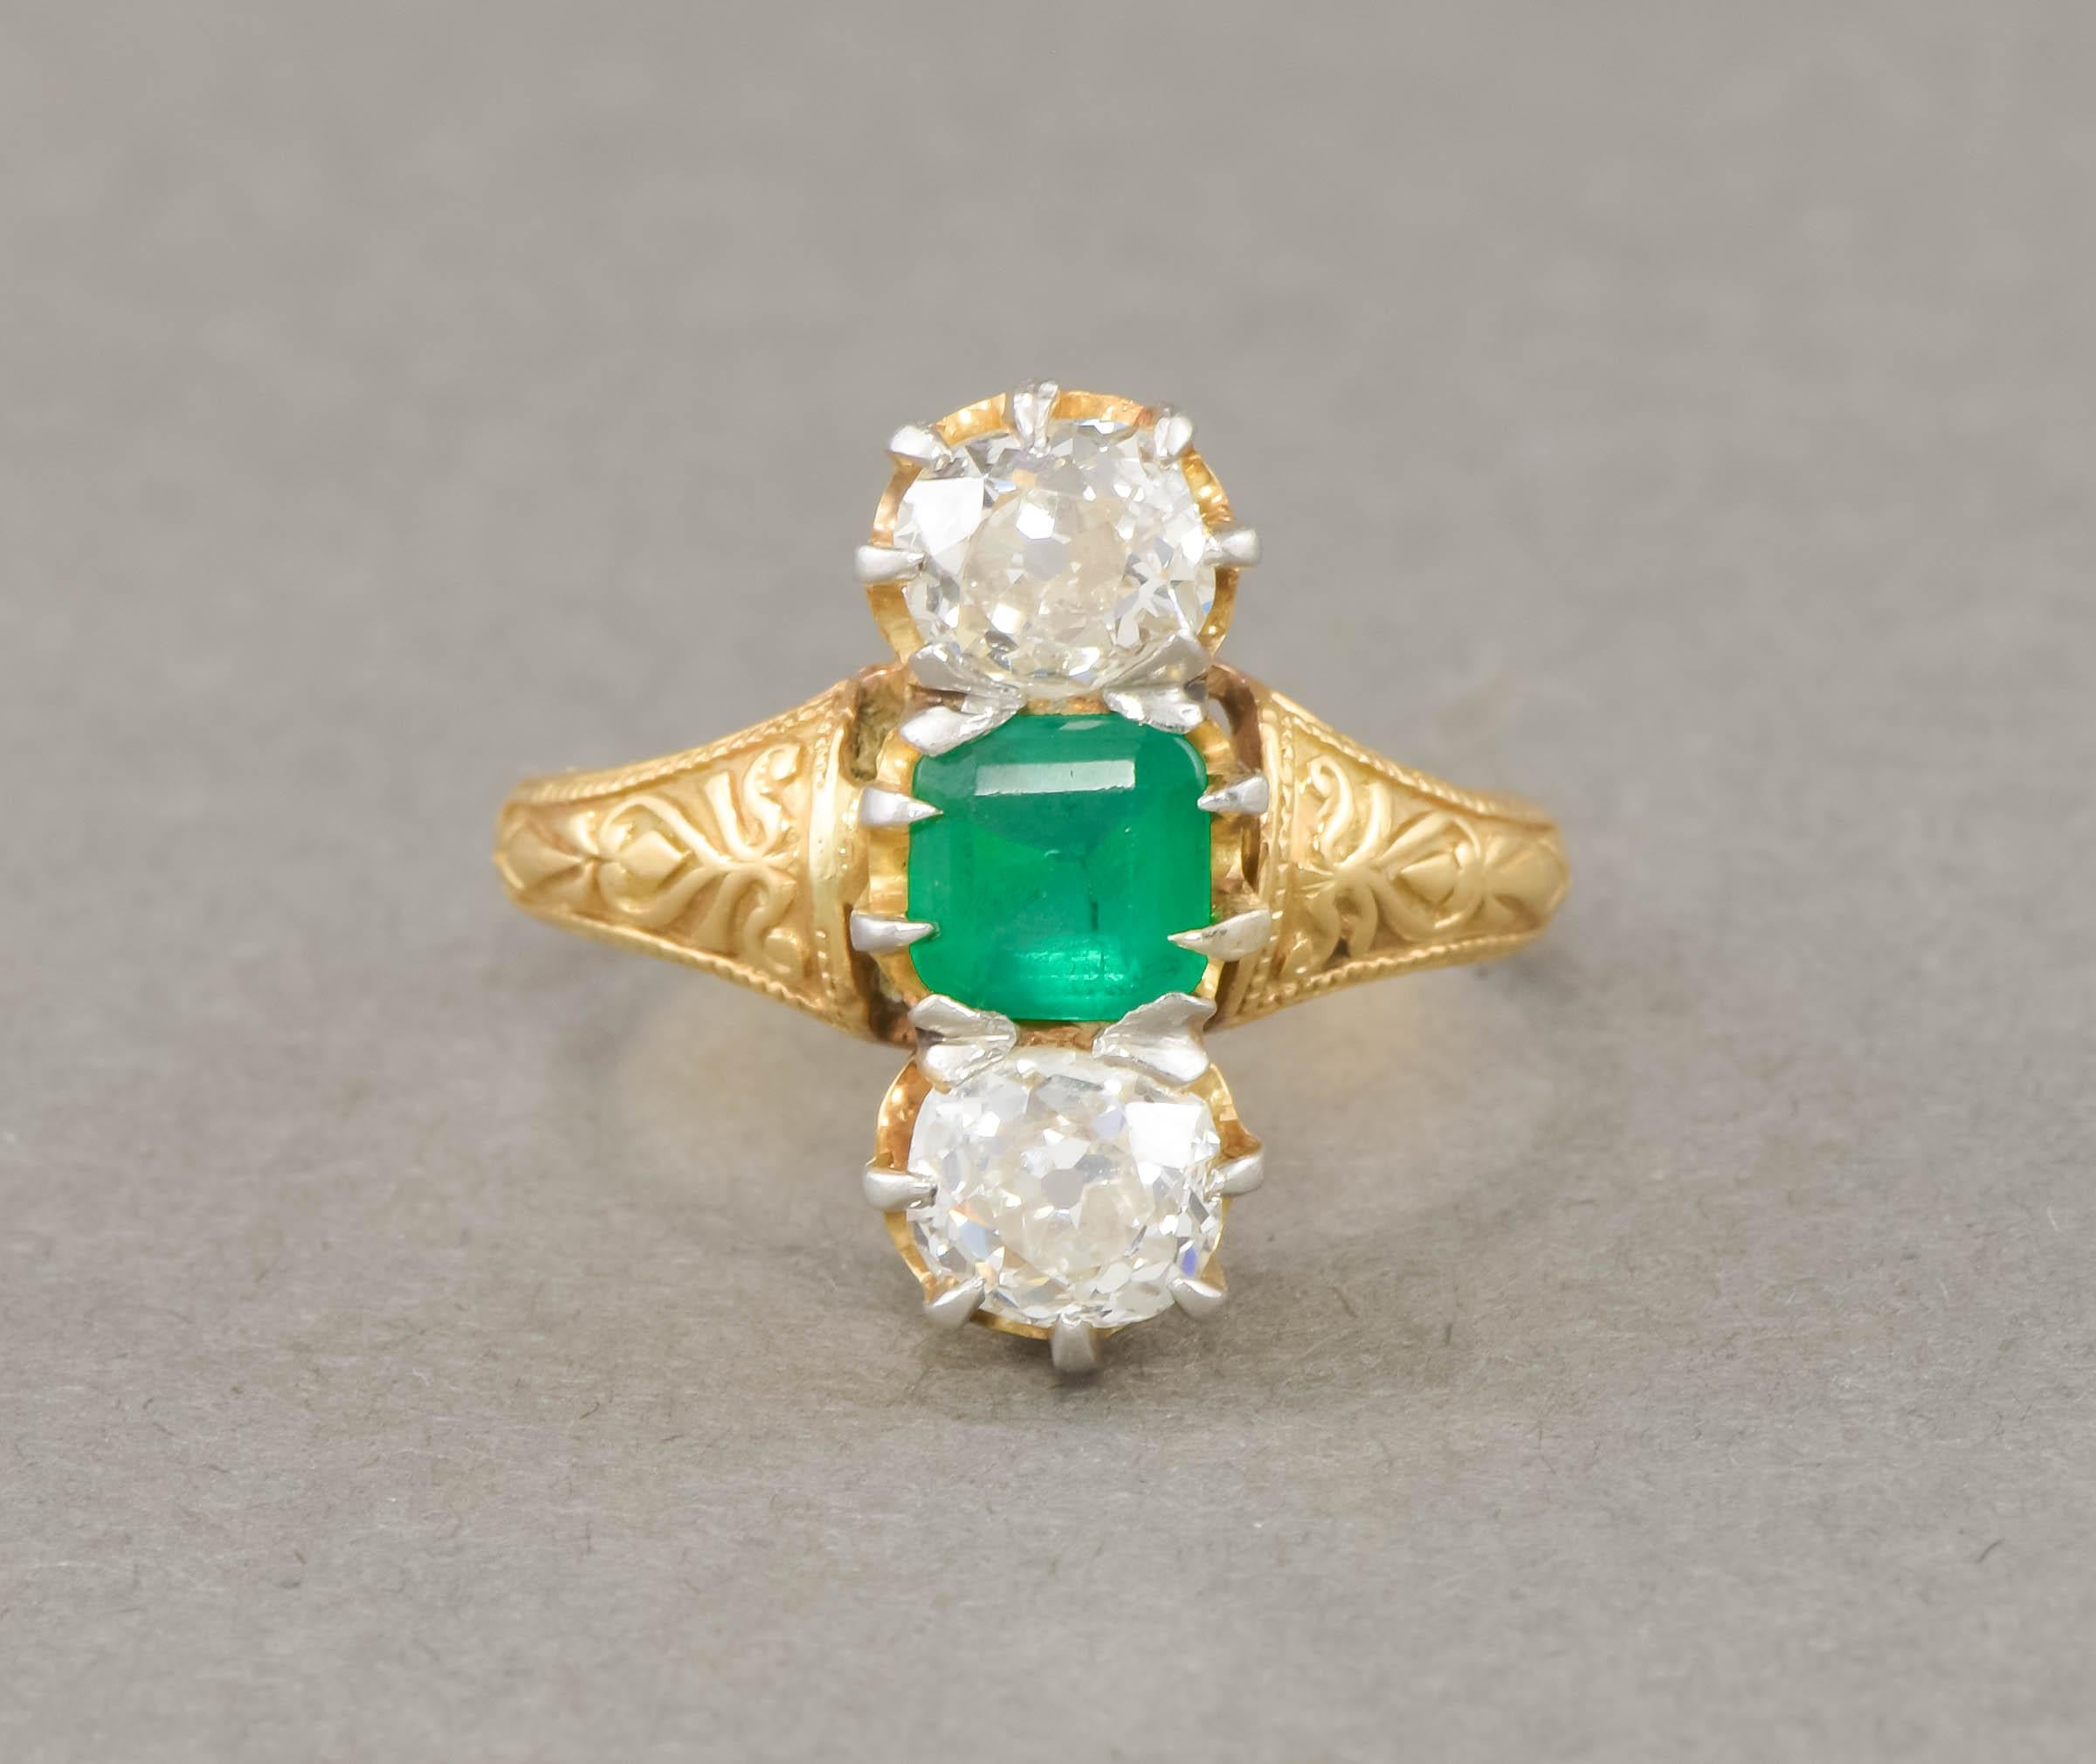 Far more beautiful than I can capture in my photos, this striking Victorian three stone ring features a rich, glowing 